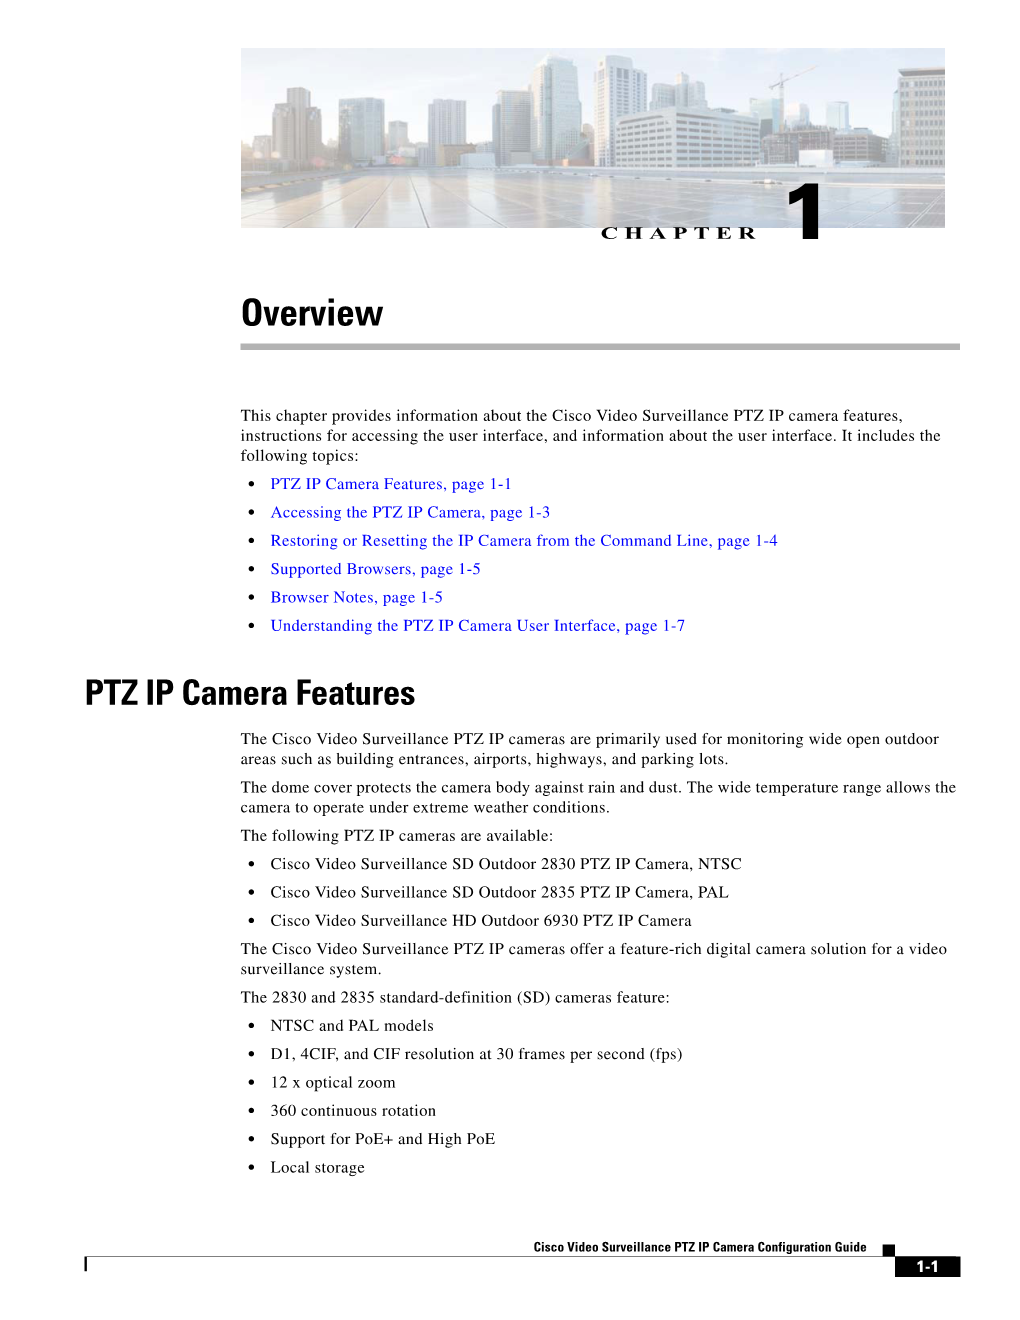 PTZ IP Camera Features, Instructions for Accessing the User Interface, and Information About the User Interface